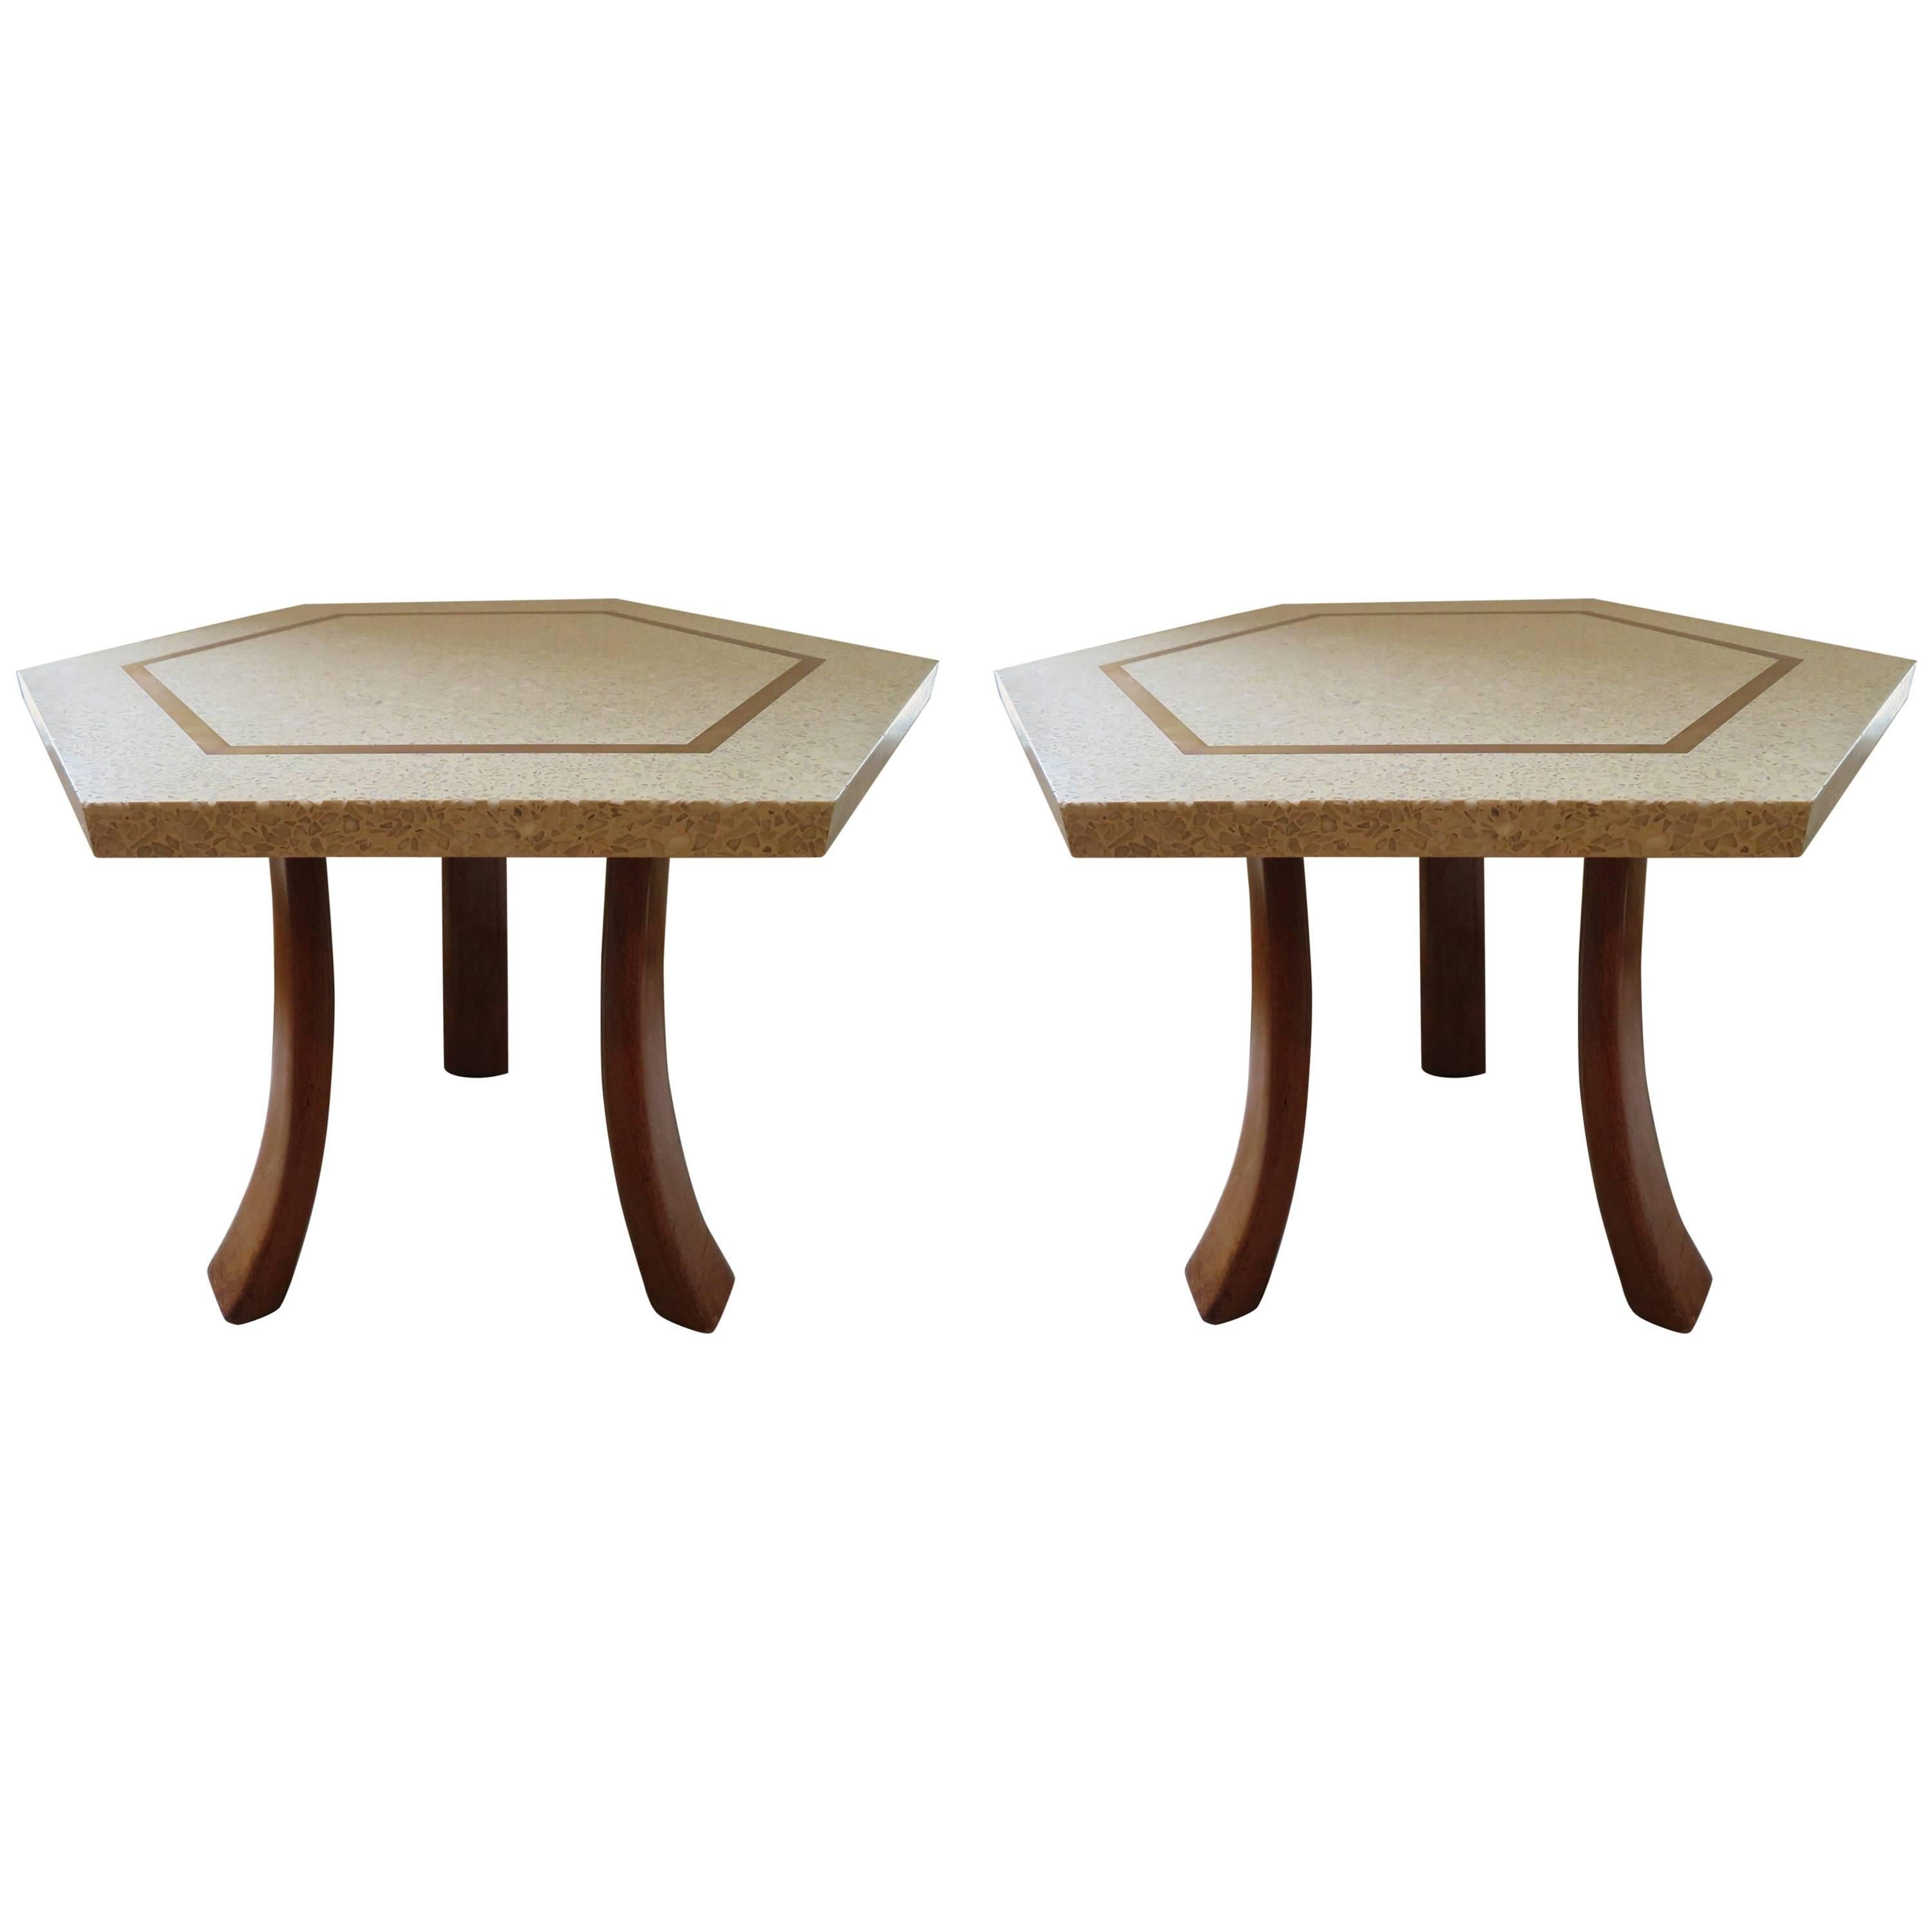 Stunning Pair of Harvey Probber Brass Inlaid Terrazzo Top Side Tables Midcentury